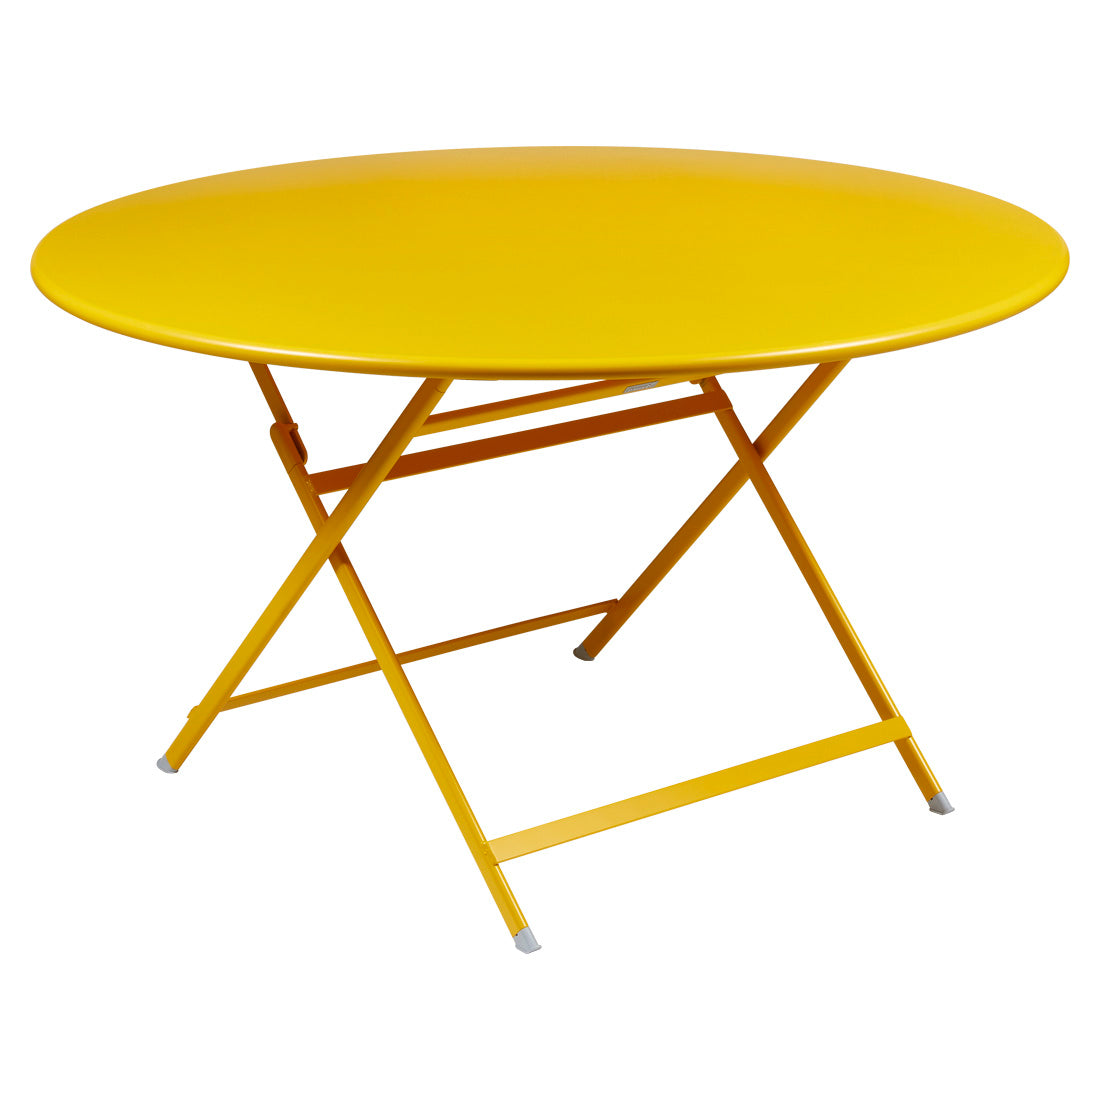 Fermob Caractère 50 inch Round Dining Table